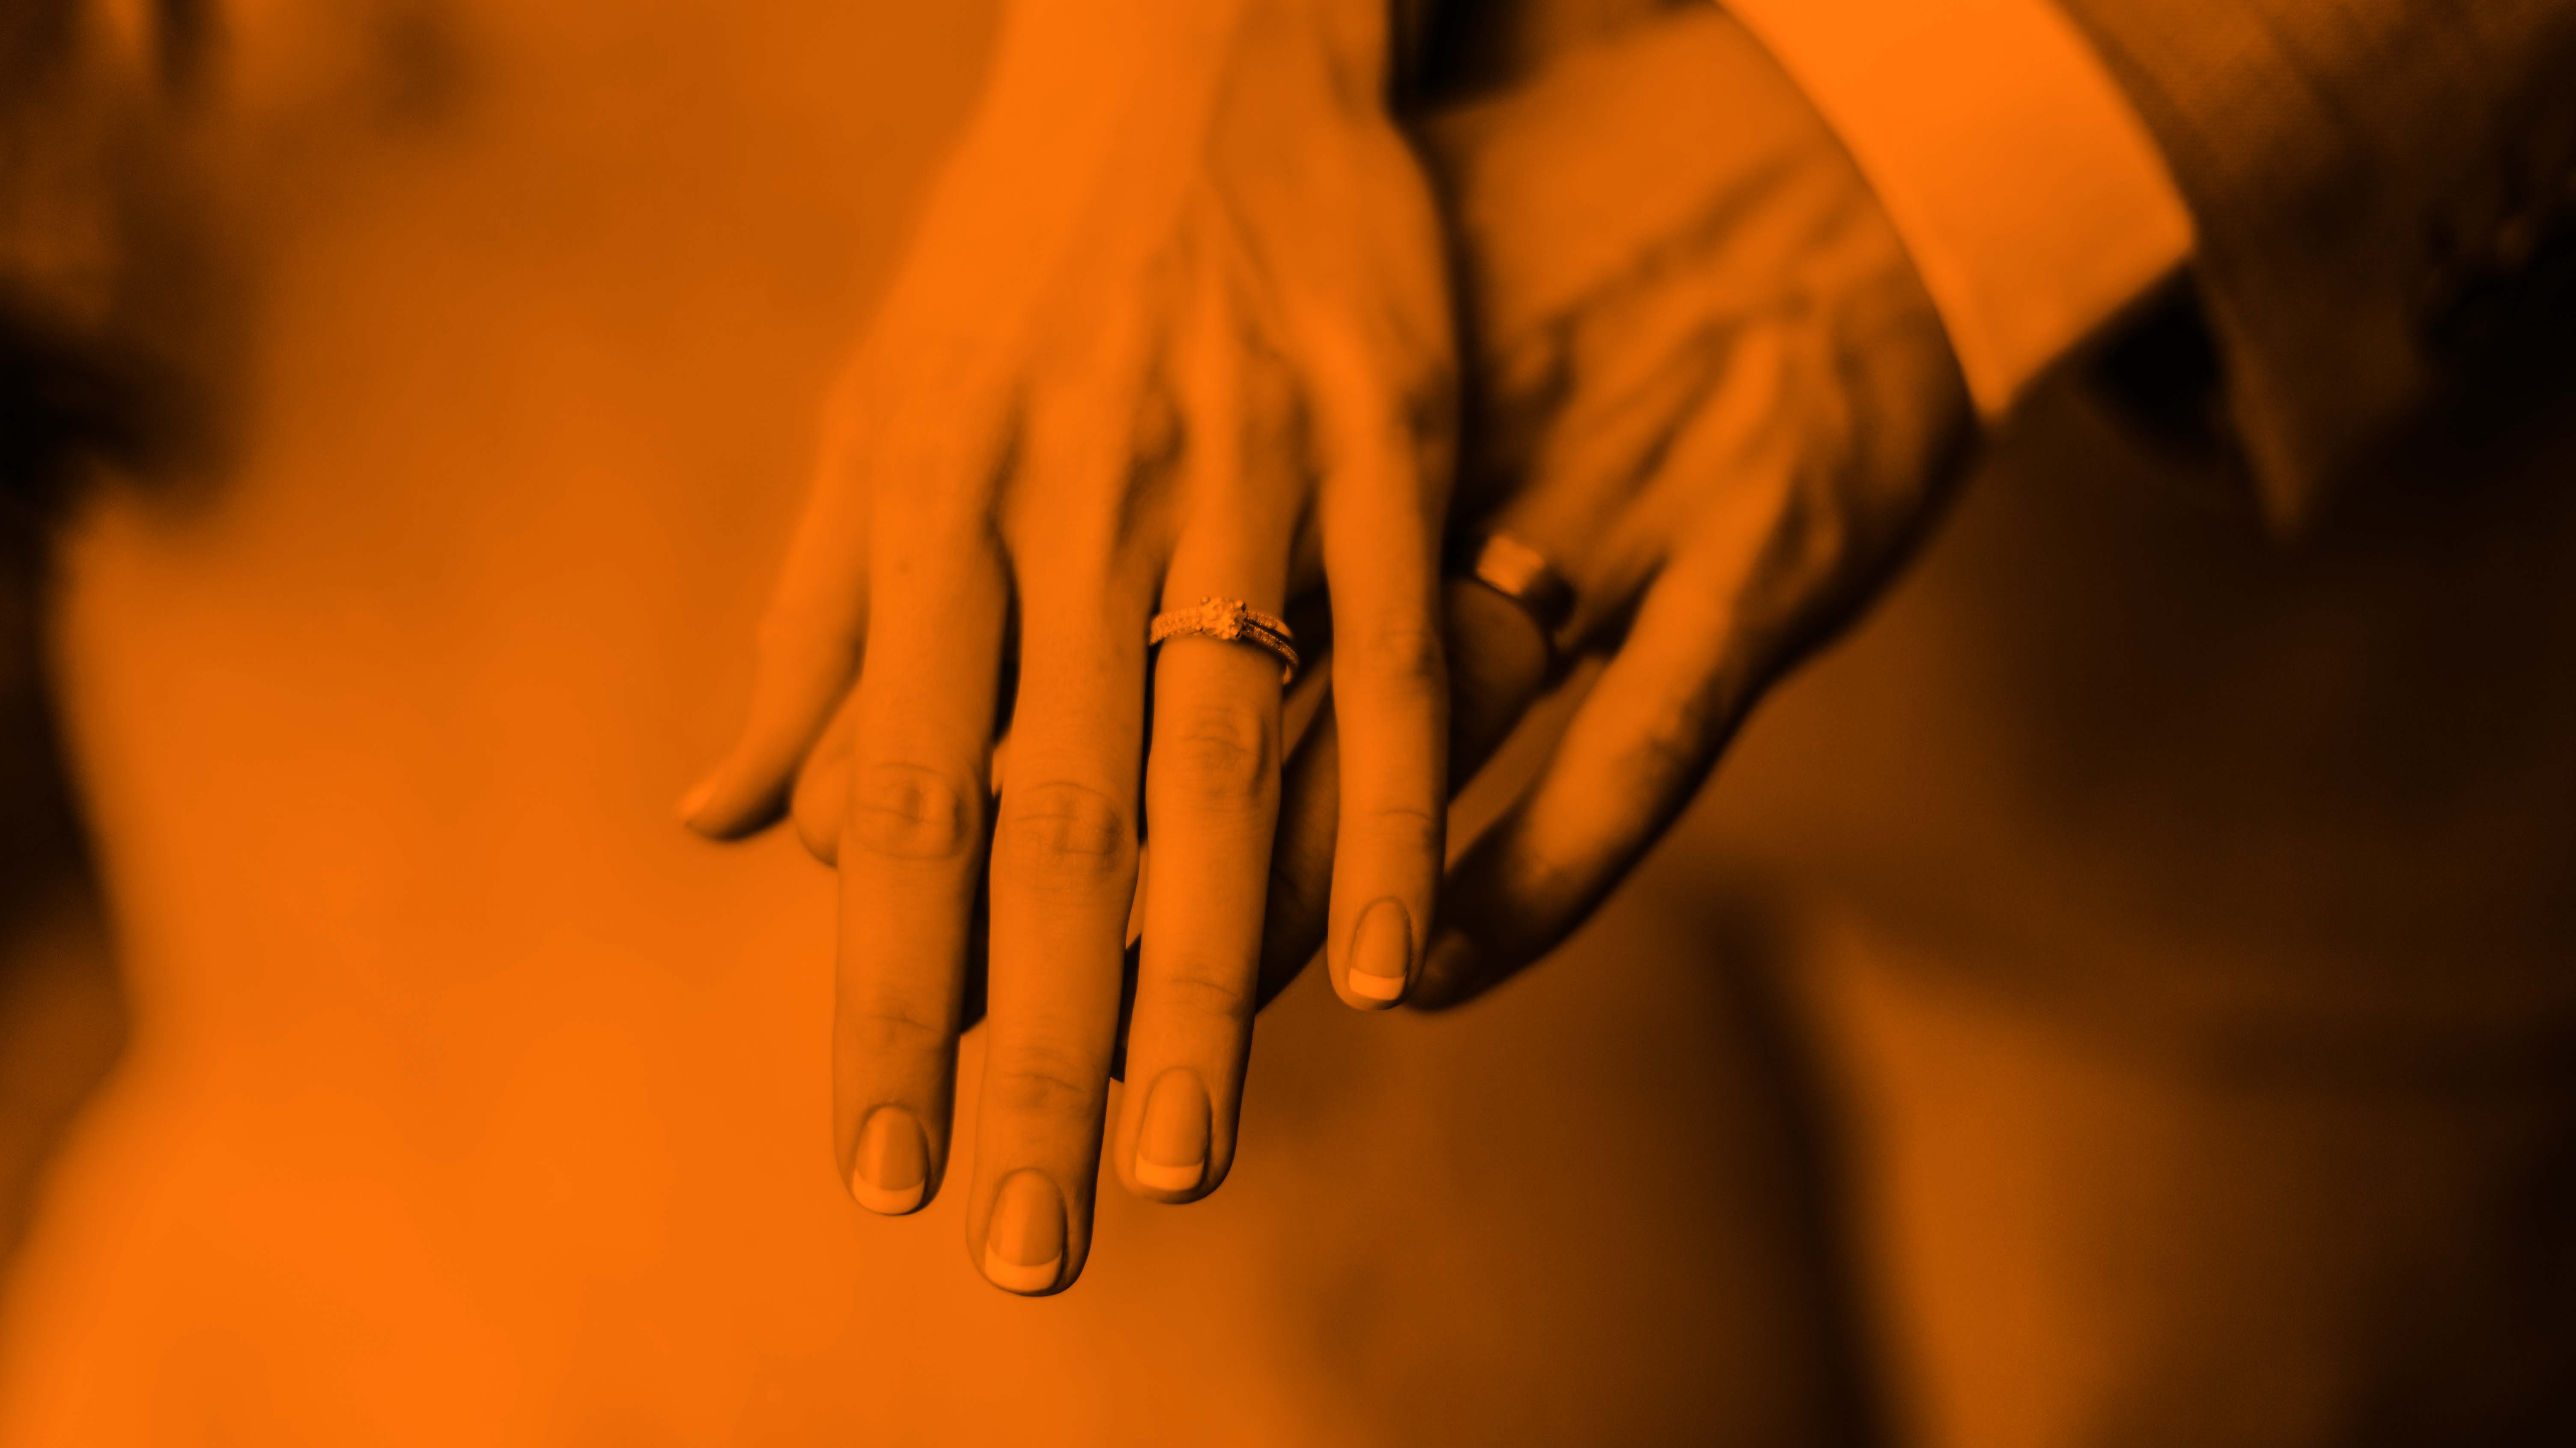 A woman's hand overtop of a man's hand as they both display their wedding bands